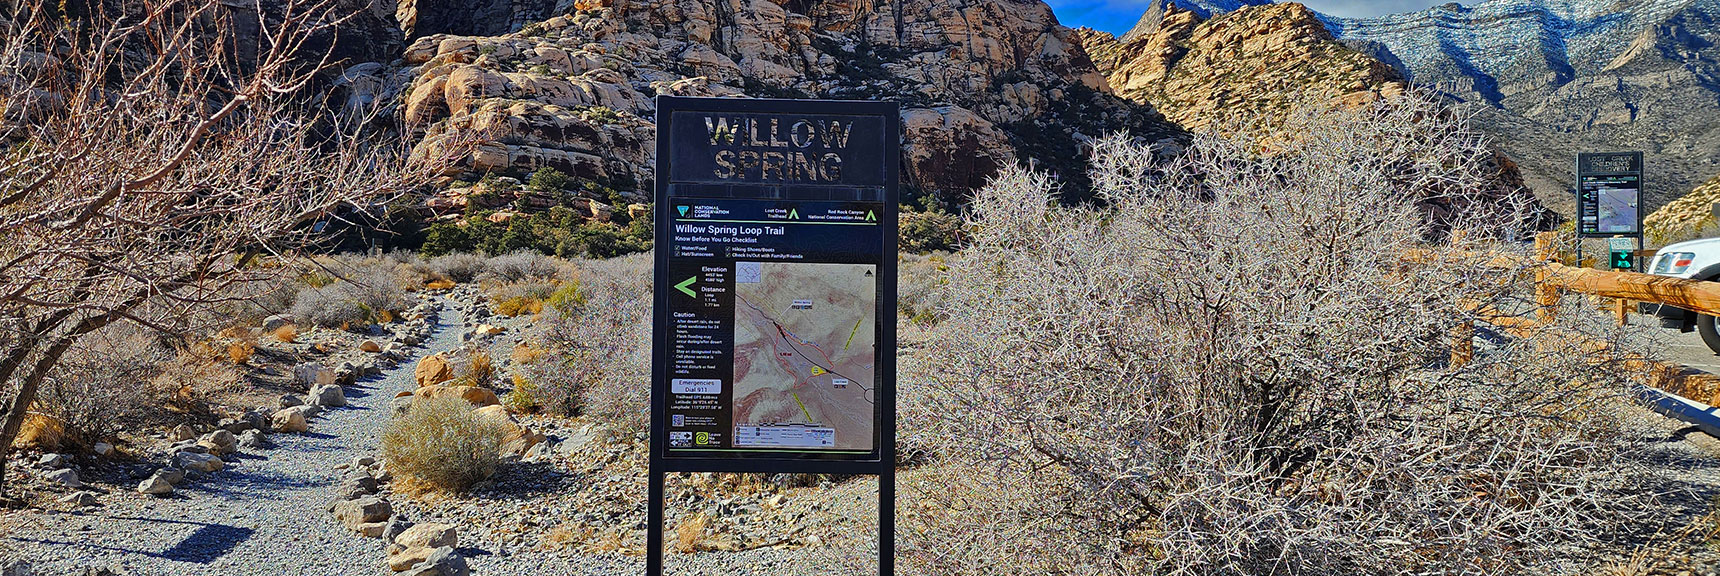 Starting Out on the Willow Spring Trail at the Upper Parking Area | Willow Spring Loop, Petroglyph Canyon, Lost Creek Canyon | Red Rock Canyon National Conservation Area, Nevada